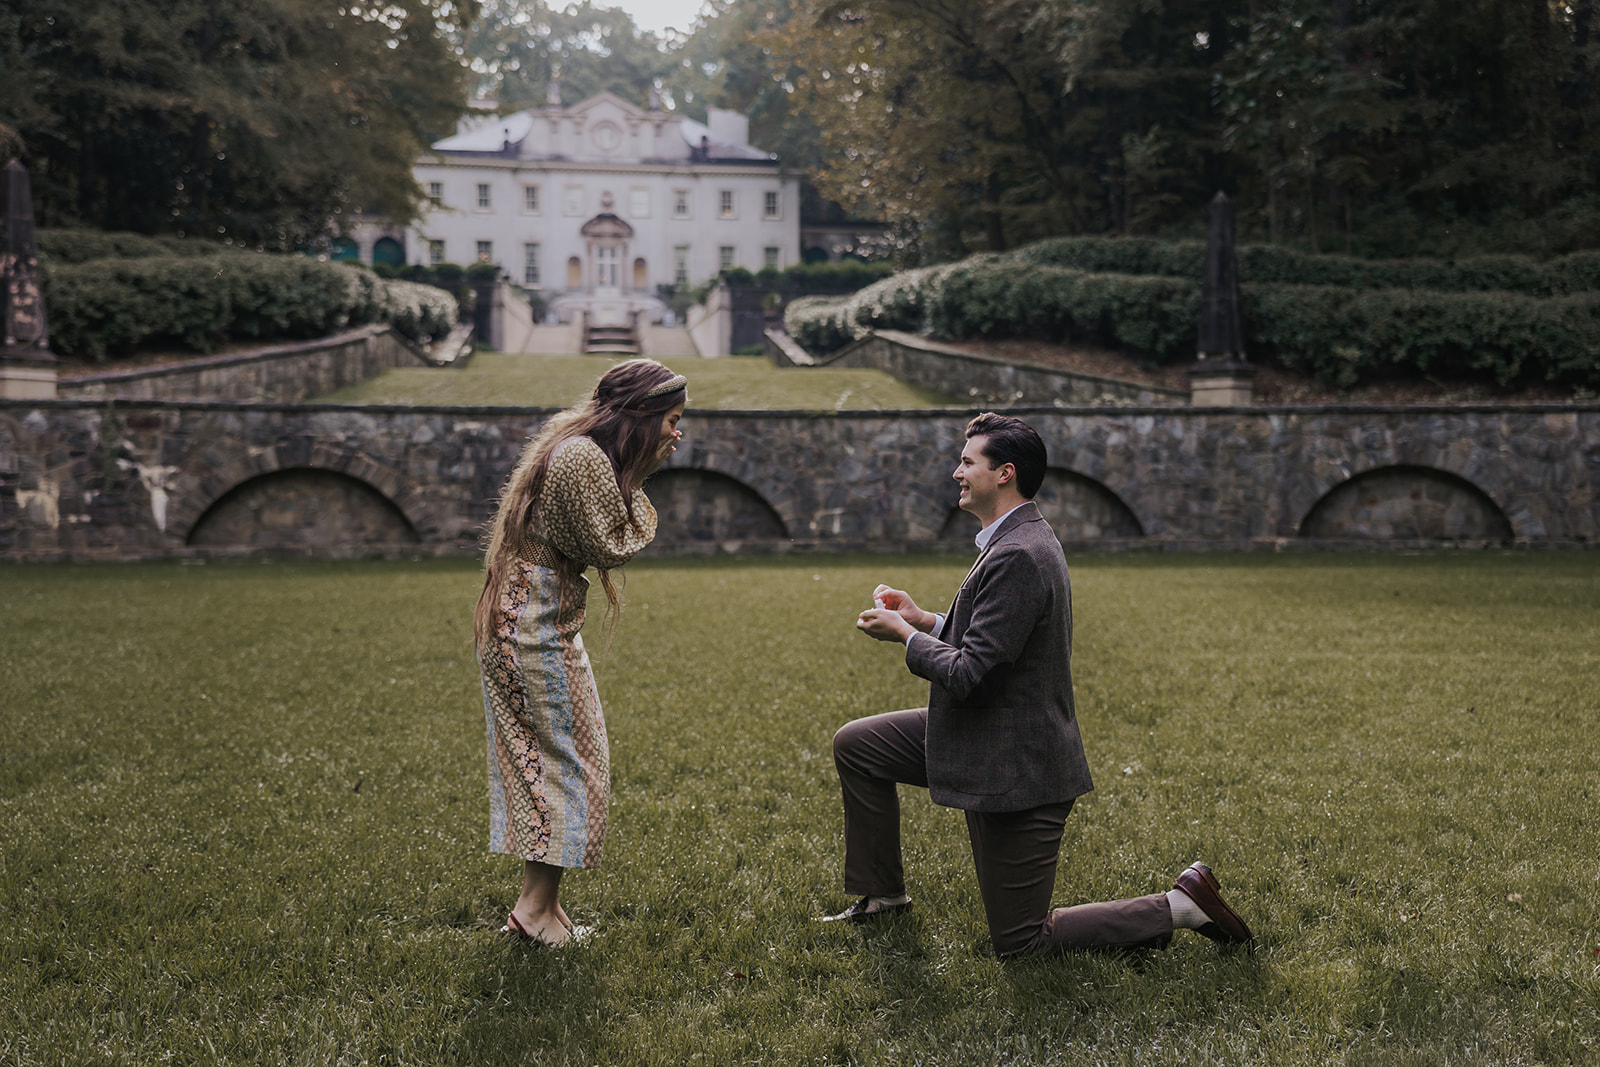 Surprise proposal at the Swan house in Georgia!